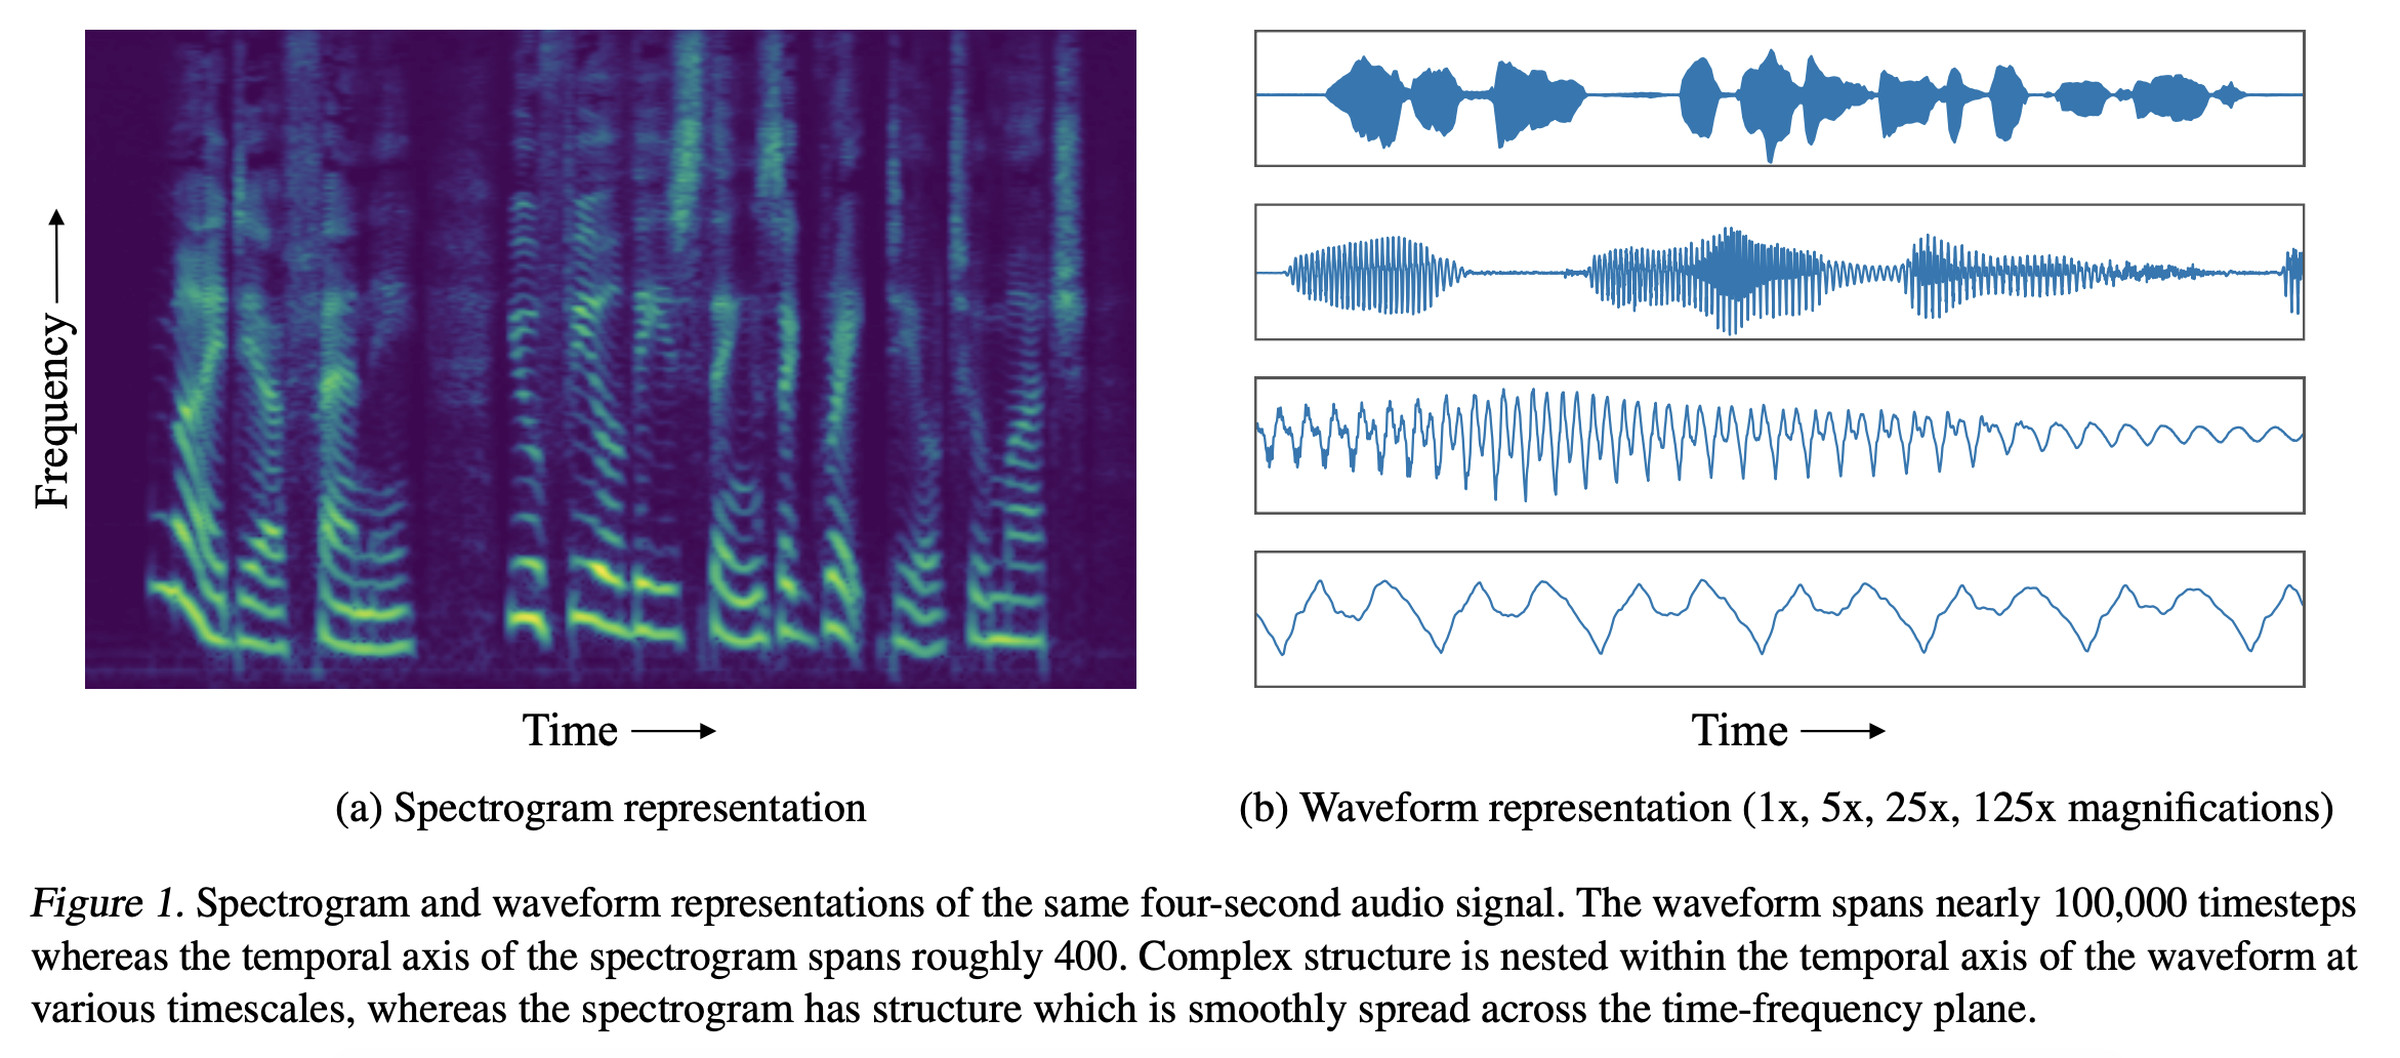 A comparison of spectrogram and waveform data. 